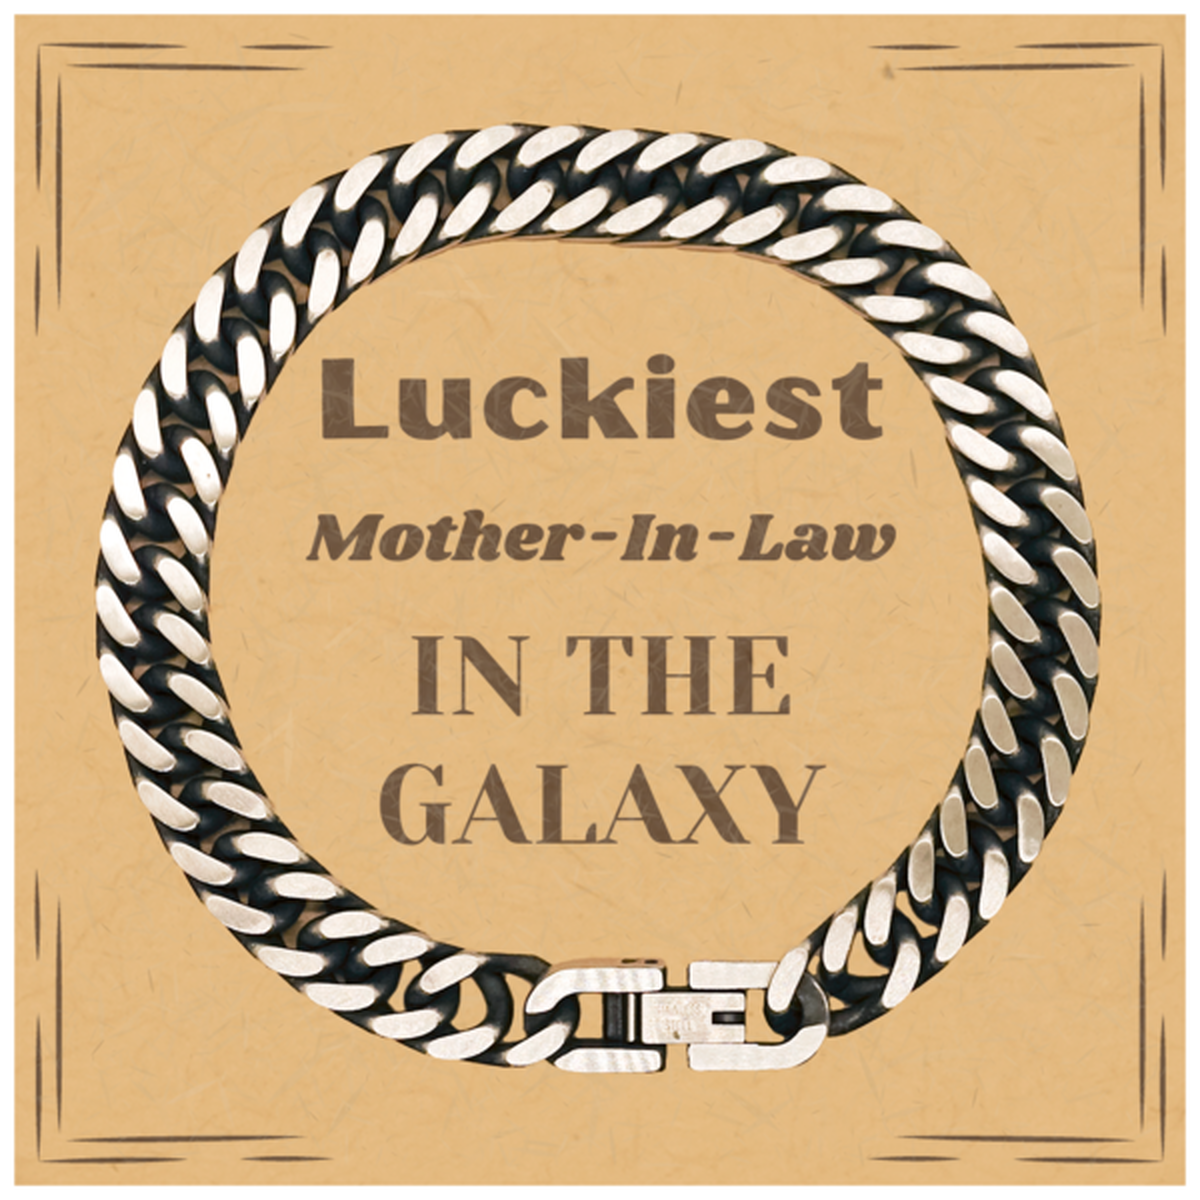 Luckiest Mother-In-Law in the Galaxy, To My Mother-In-Law Message Card Gifts, Christmas Mother-In-Law Cuban Link Chain Bracelet Gifts, X-mas Birthday Unique Gifts For Mother-In-Law Men Women